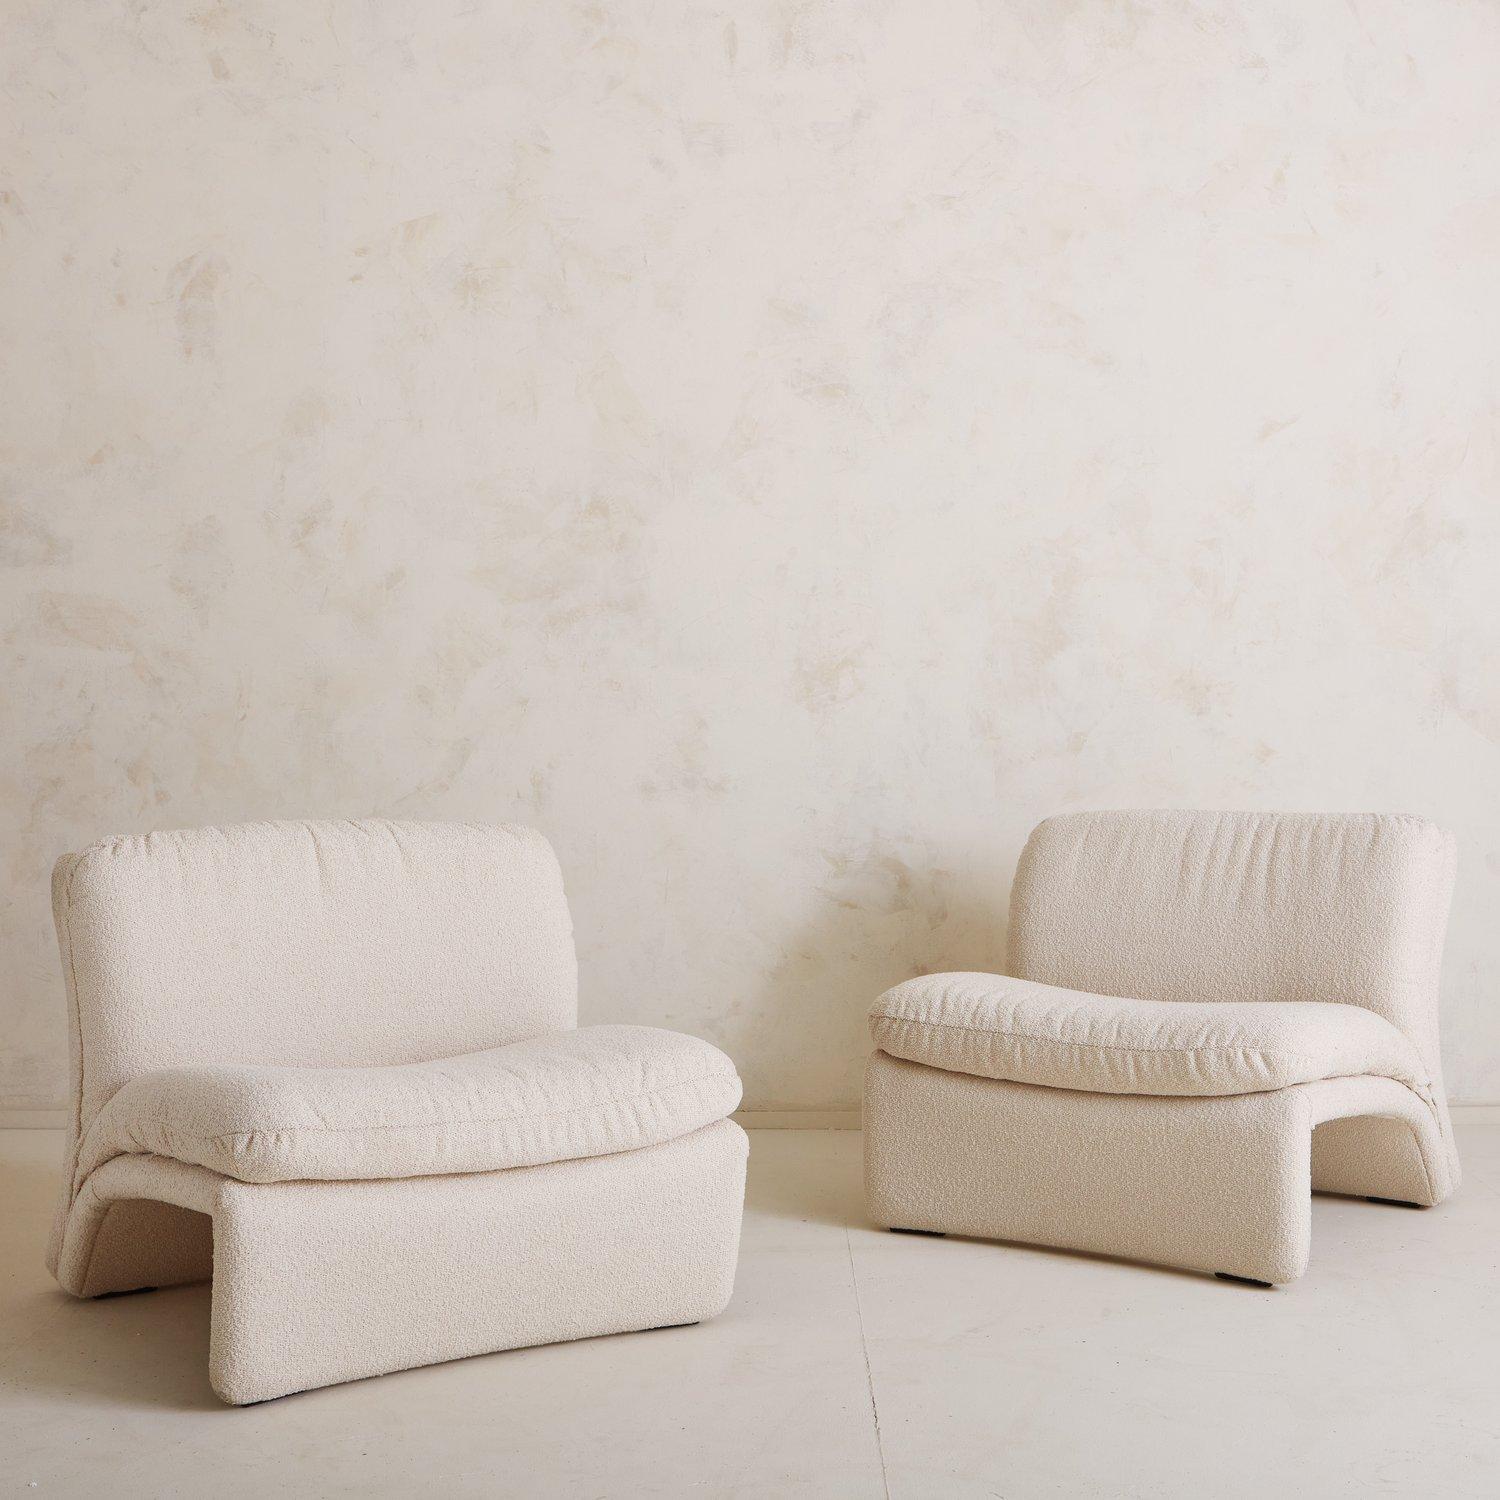 A pair of sculptural vintage lounge chairs upholstered in a textural ivory fabric. We love the dramatic curves on these statement chairs. Sourced in Italy, 20th Century.